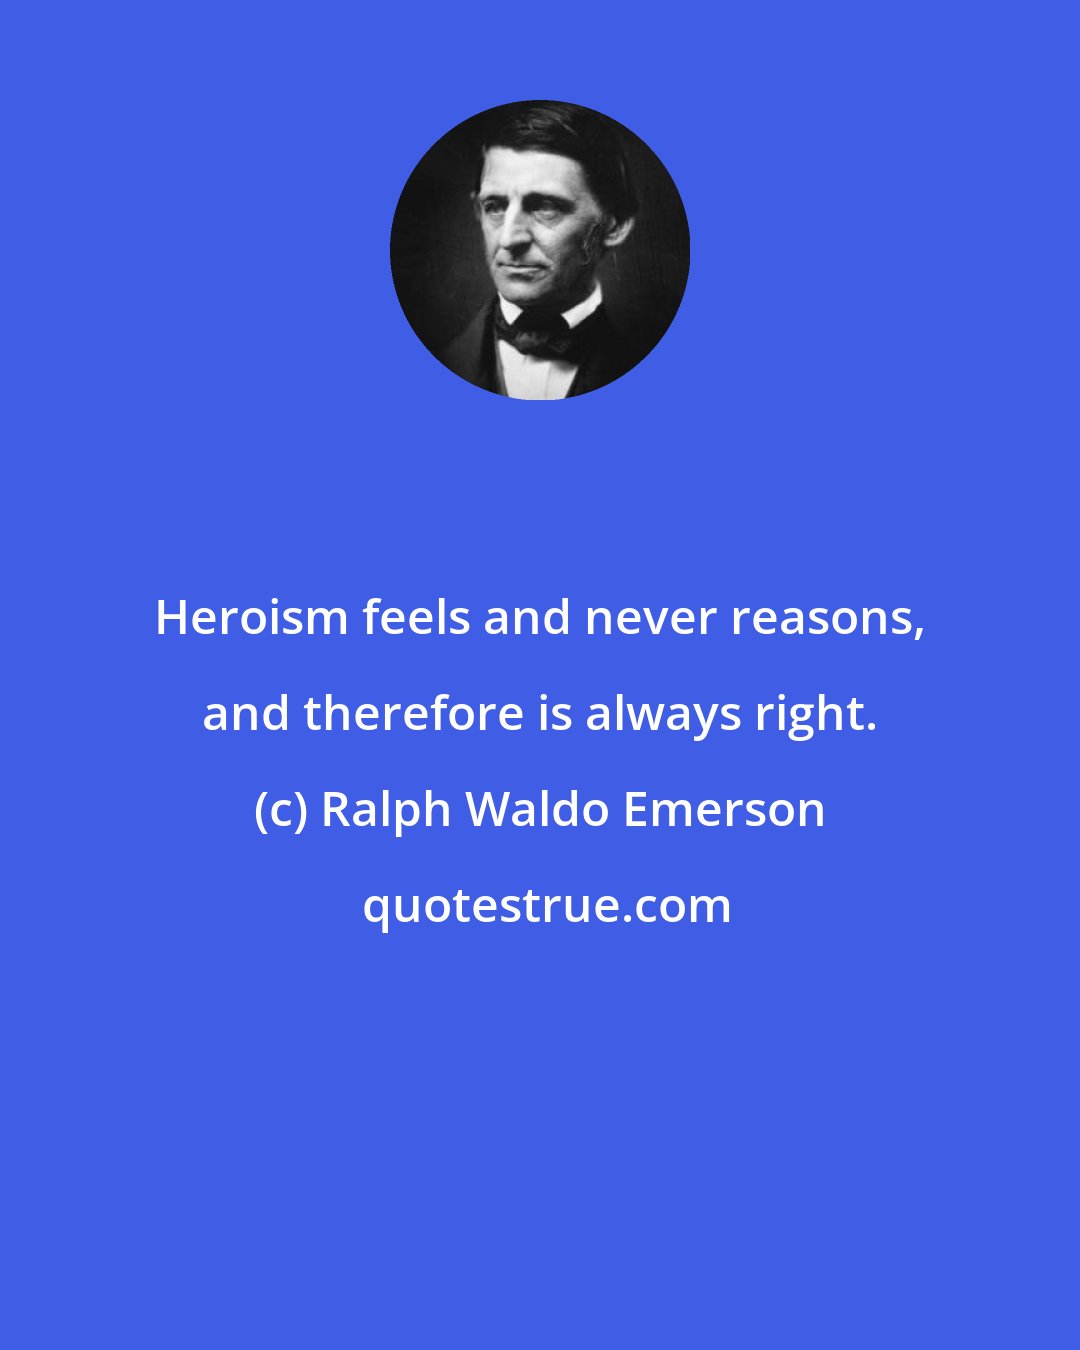 Ralph Waldo Emerson: Heroism feels and never reasons, and therefore is always right.